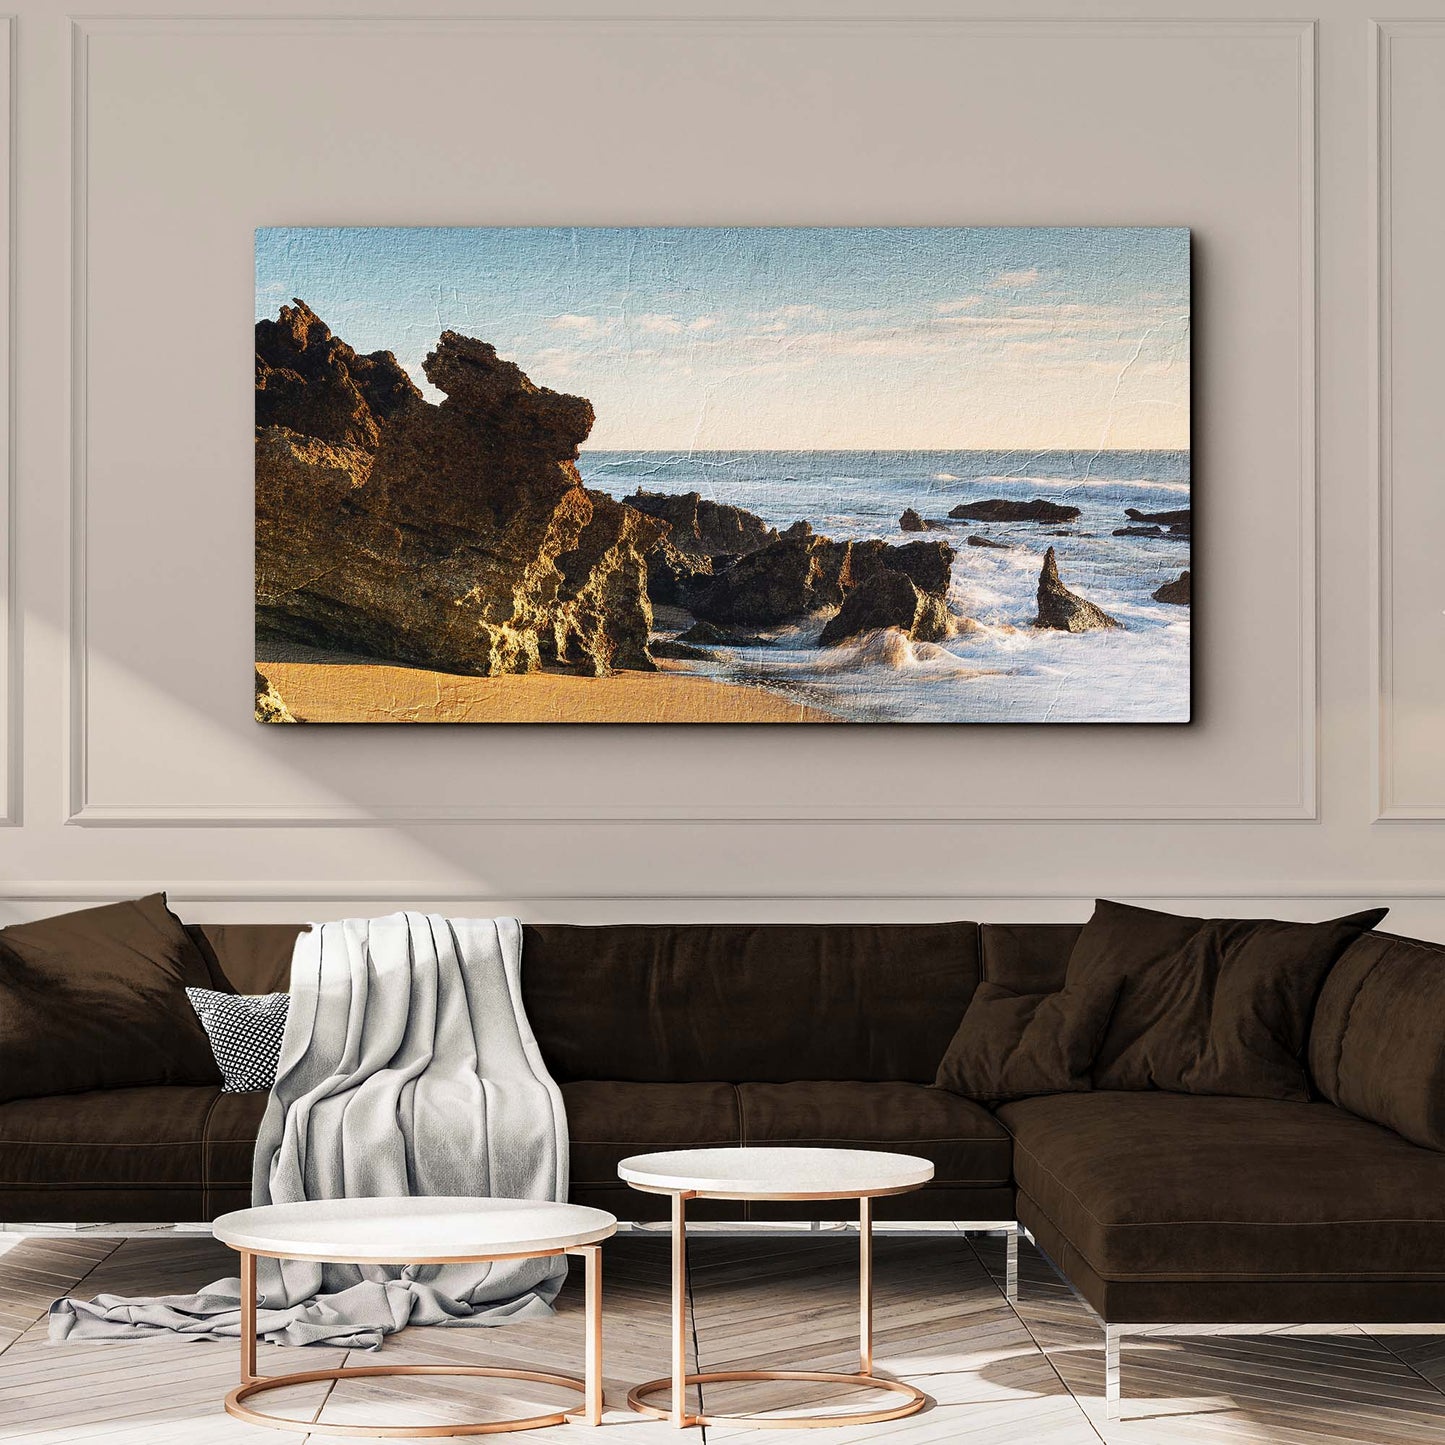 Sunset At California Beach Canvas Wall Art Style 1 - Image by Tailored Canvases